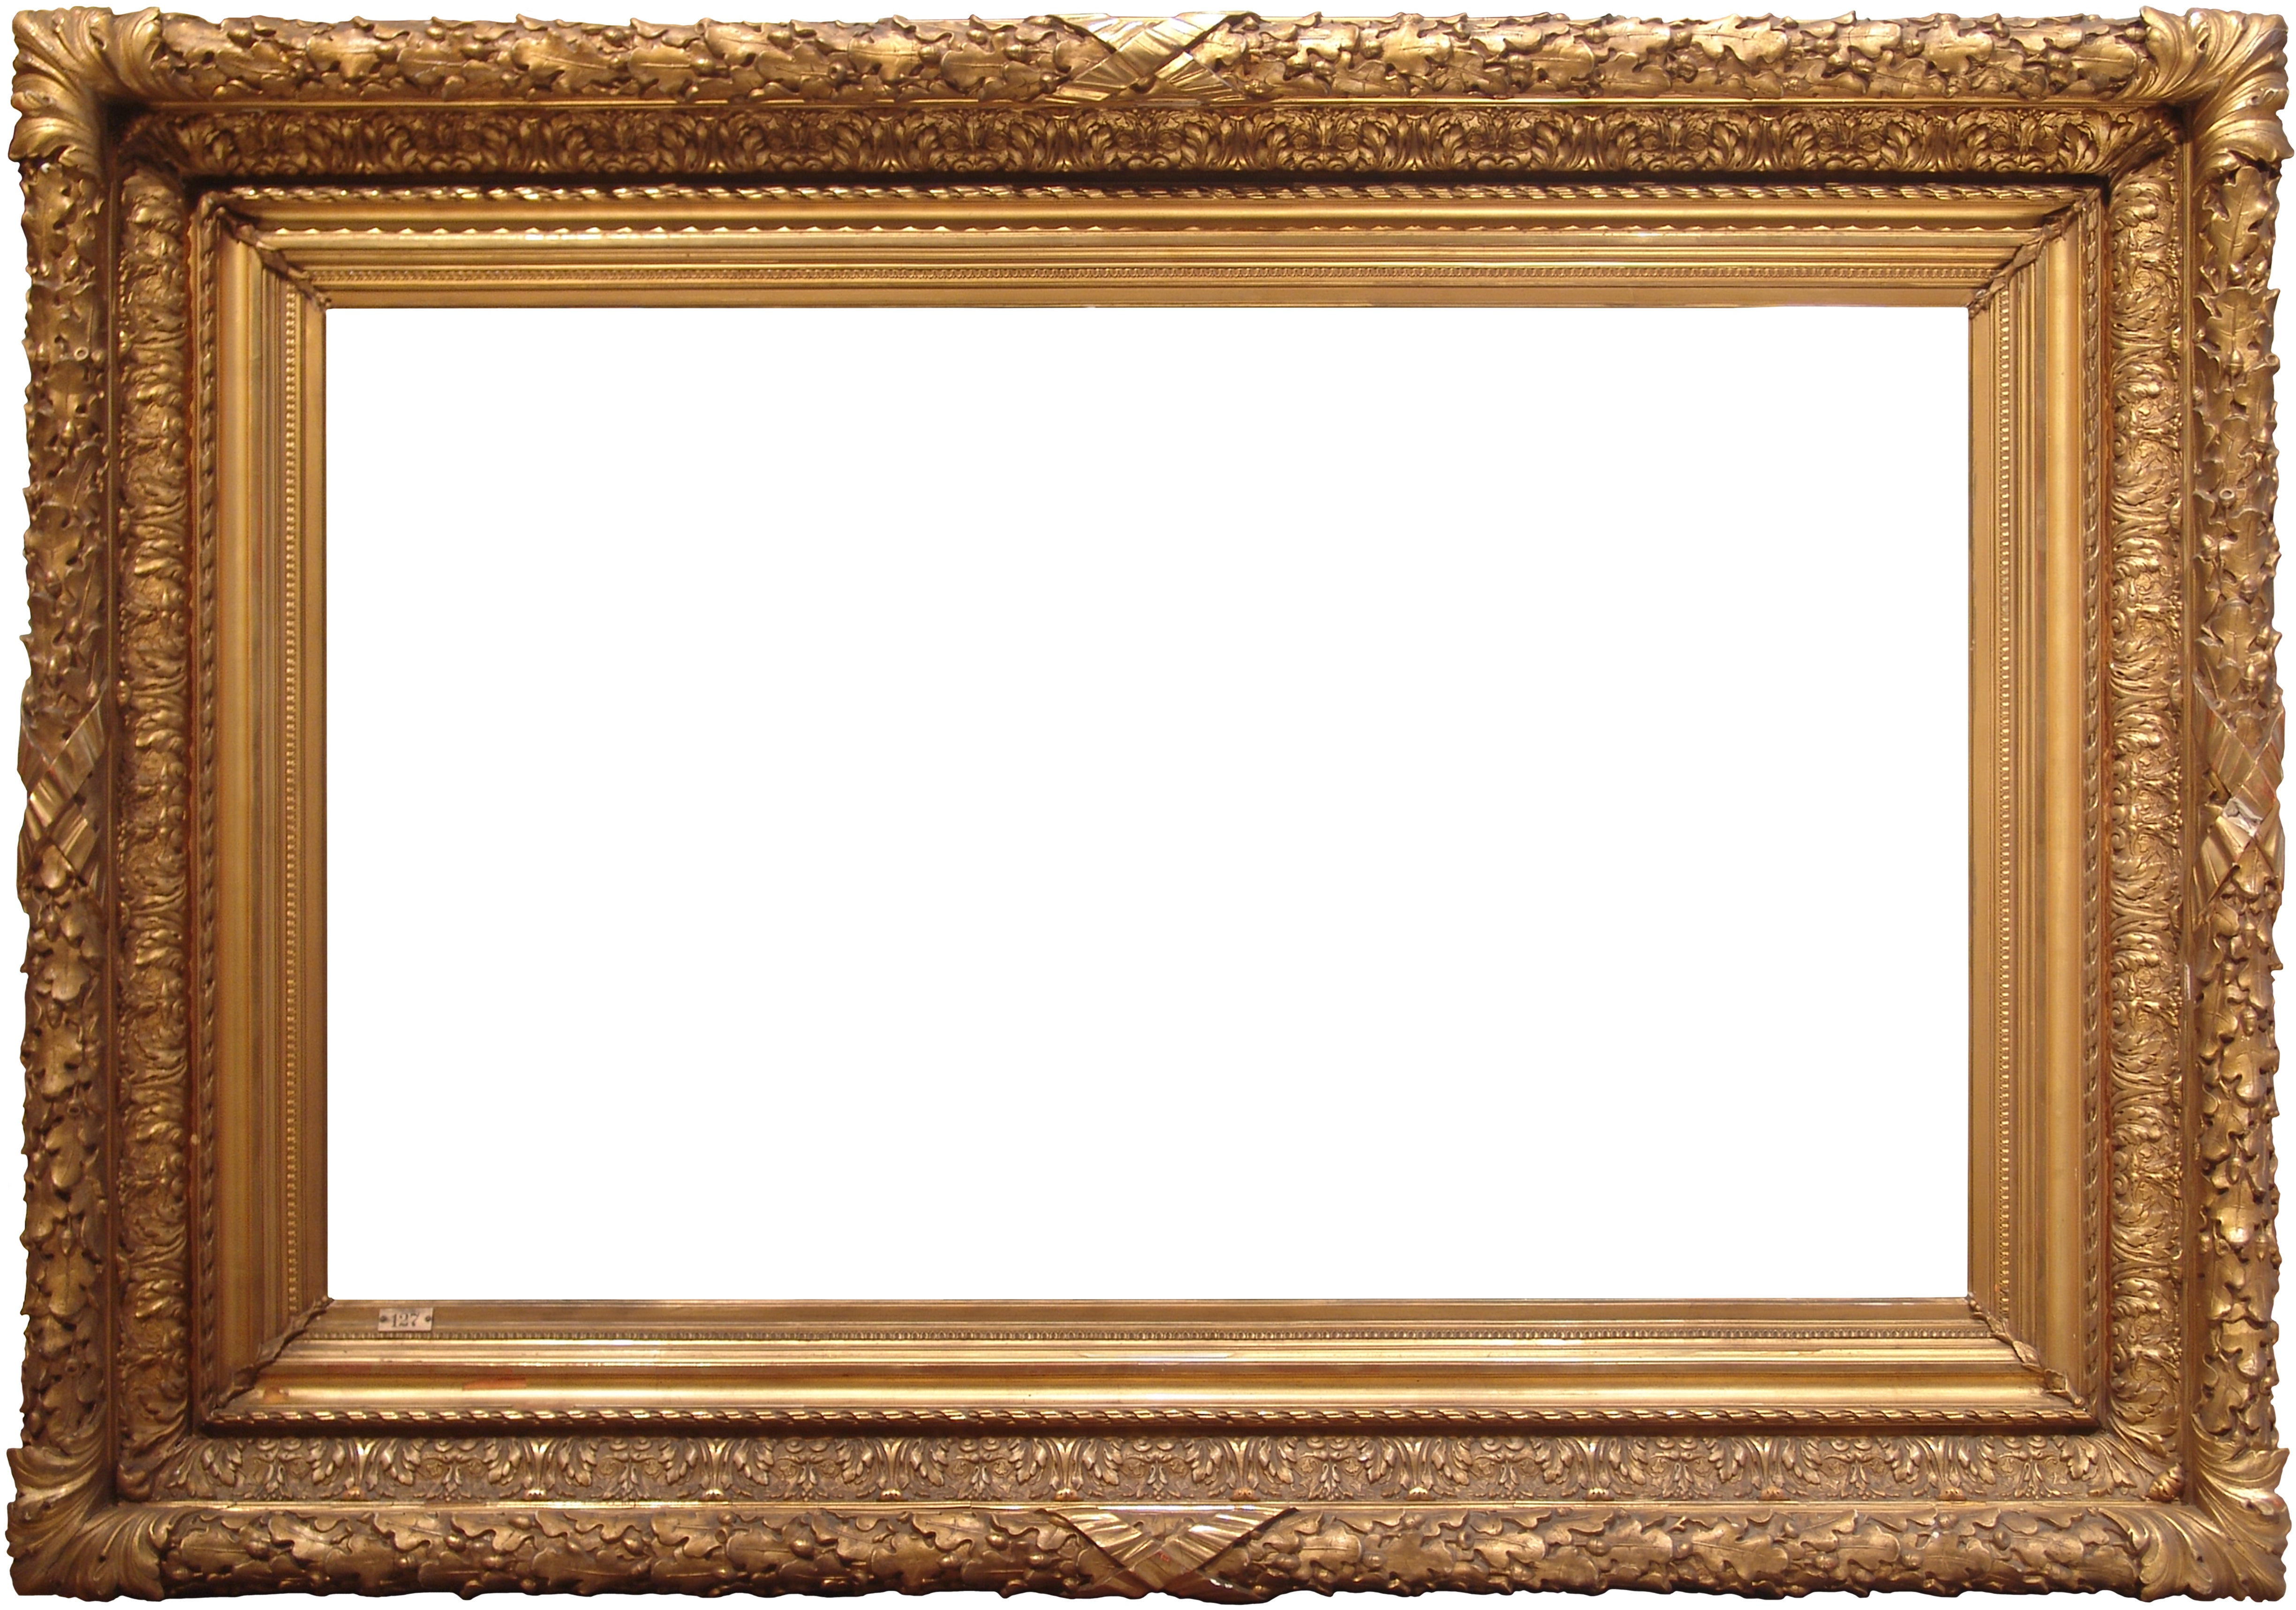 1880s American Barbizon Painting Frame; Gilded Cast Ornament on Wood. For Sale